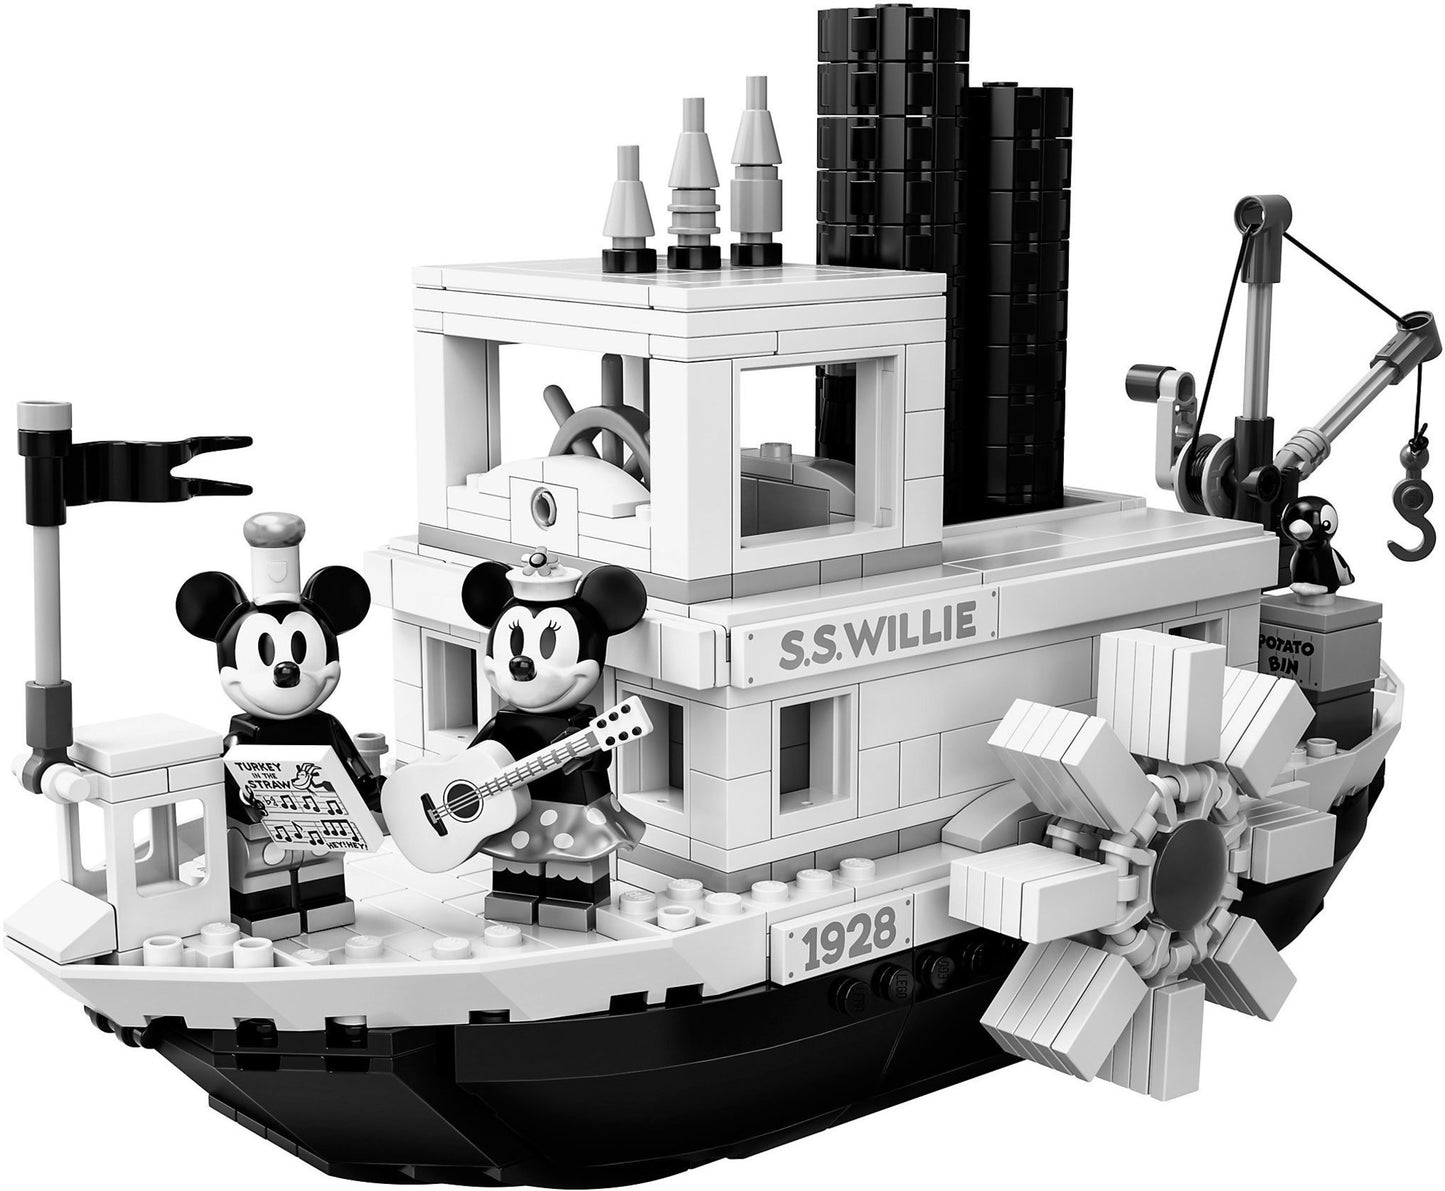 21317 LEGO Ideas - Steamboat Willie